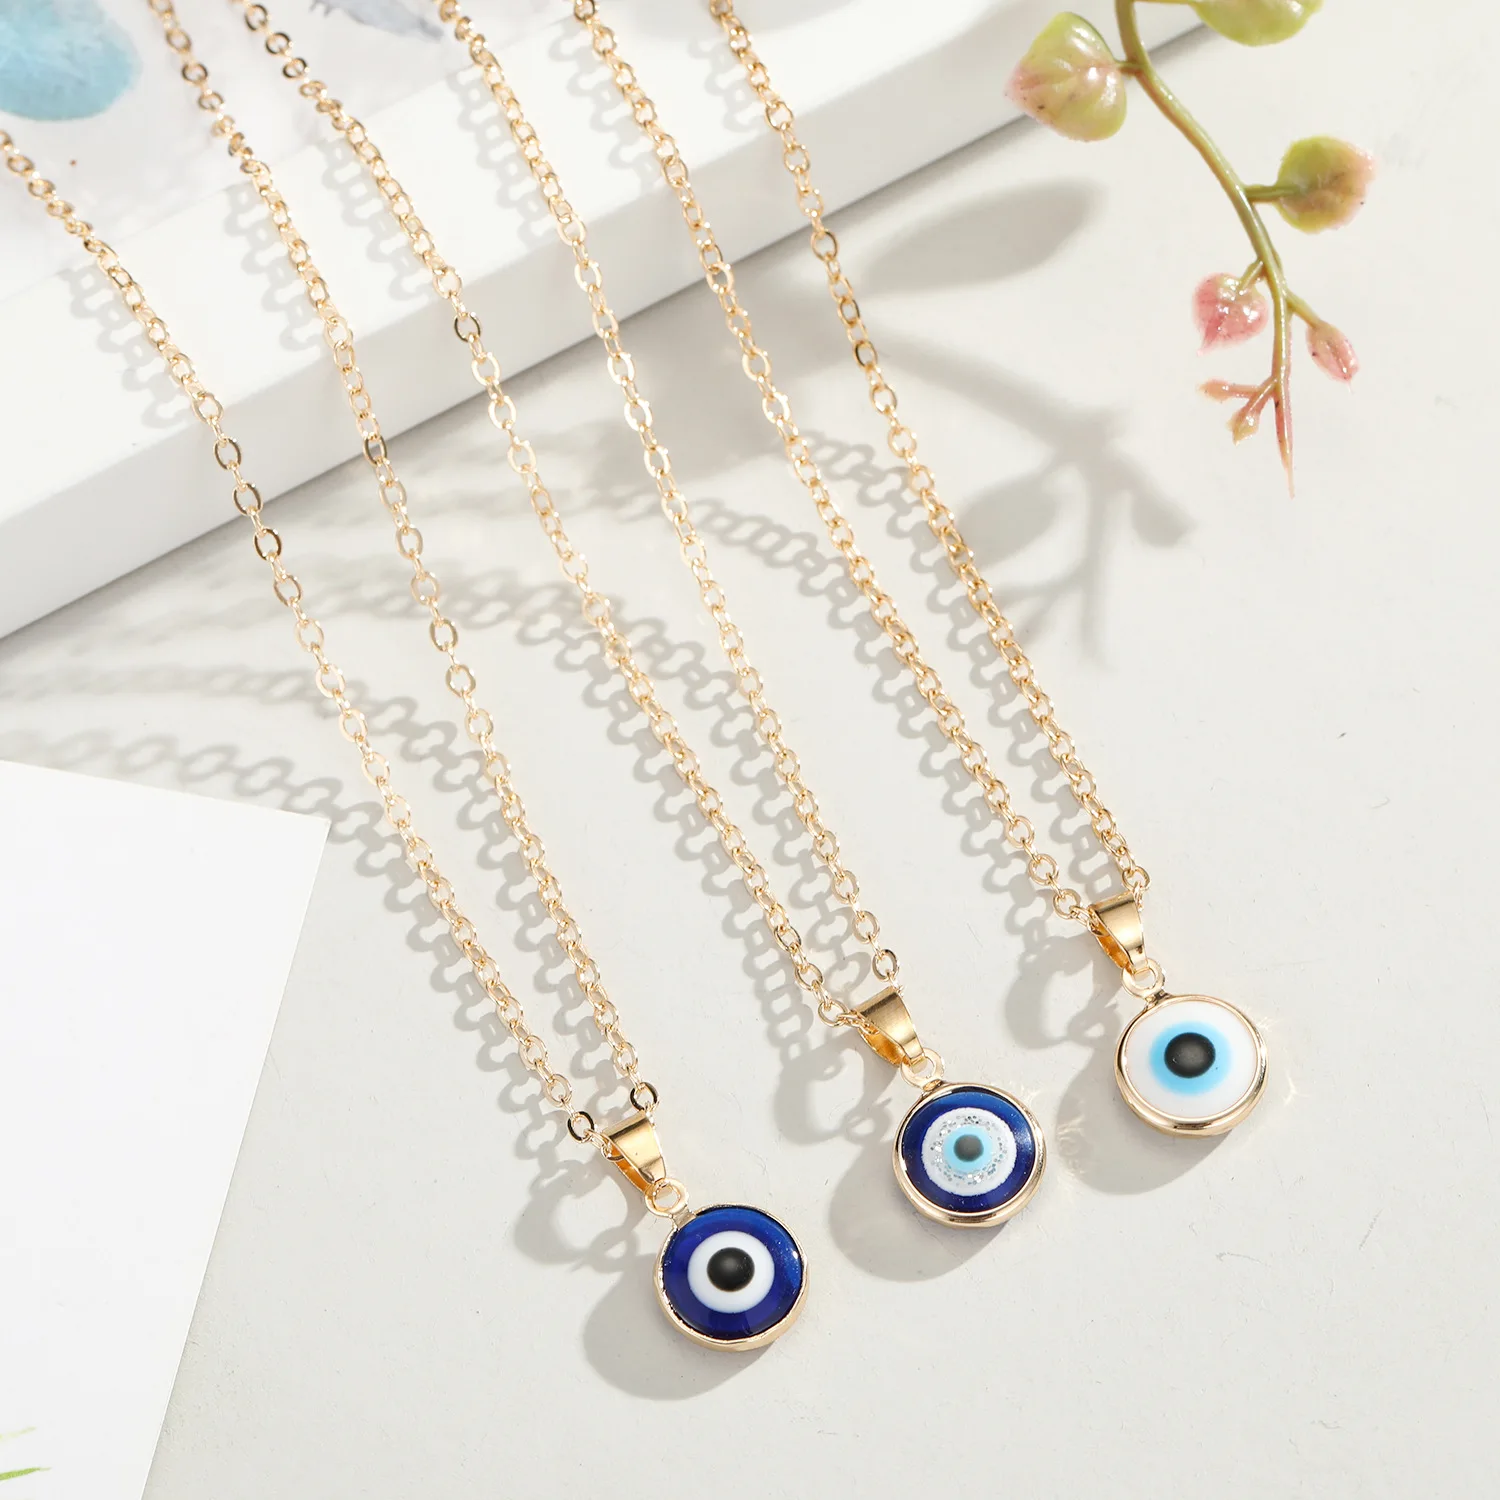 

Fashion Gold Plated Bound Devil Eye Necklace Turkey Evil Eyes Necklace For Women Jewelry Gift, Picture shows